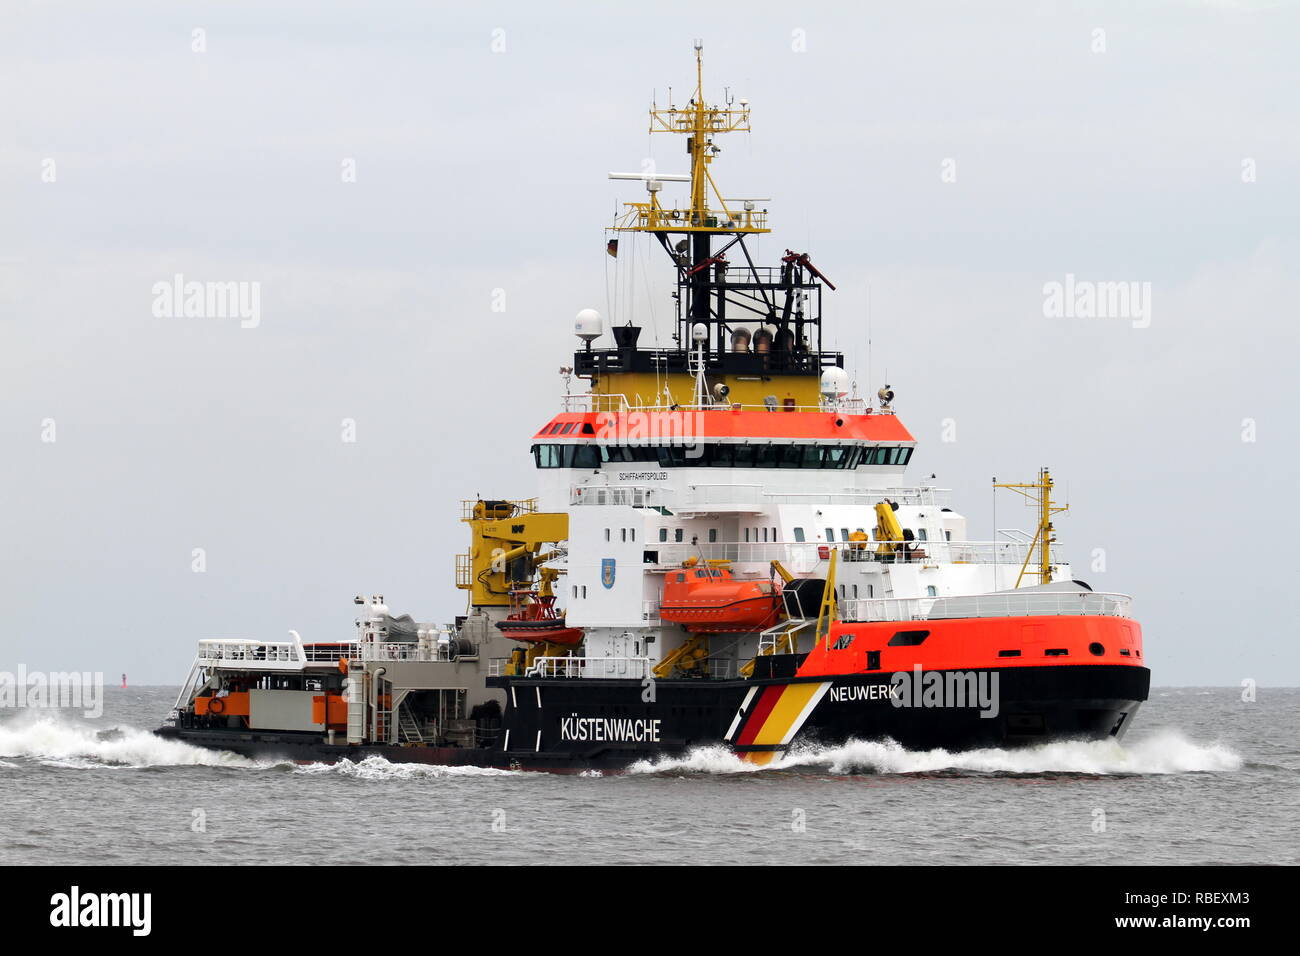 The ship of the Coast Guard Neuwerk reached the port of Cuxhaven on 9th August 2014. Stock Photo